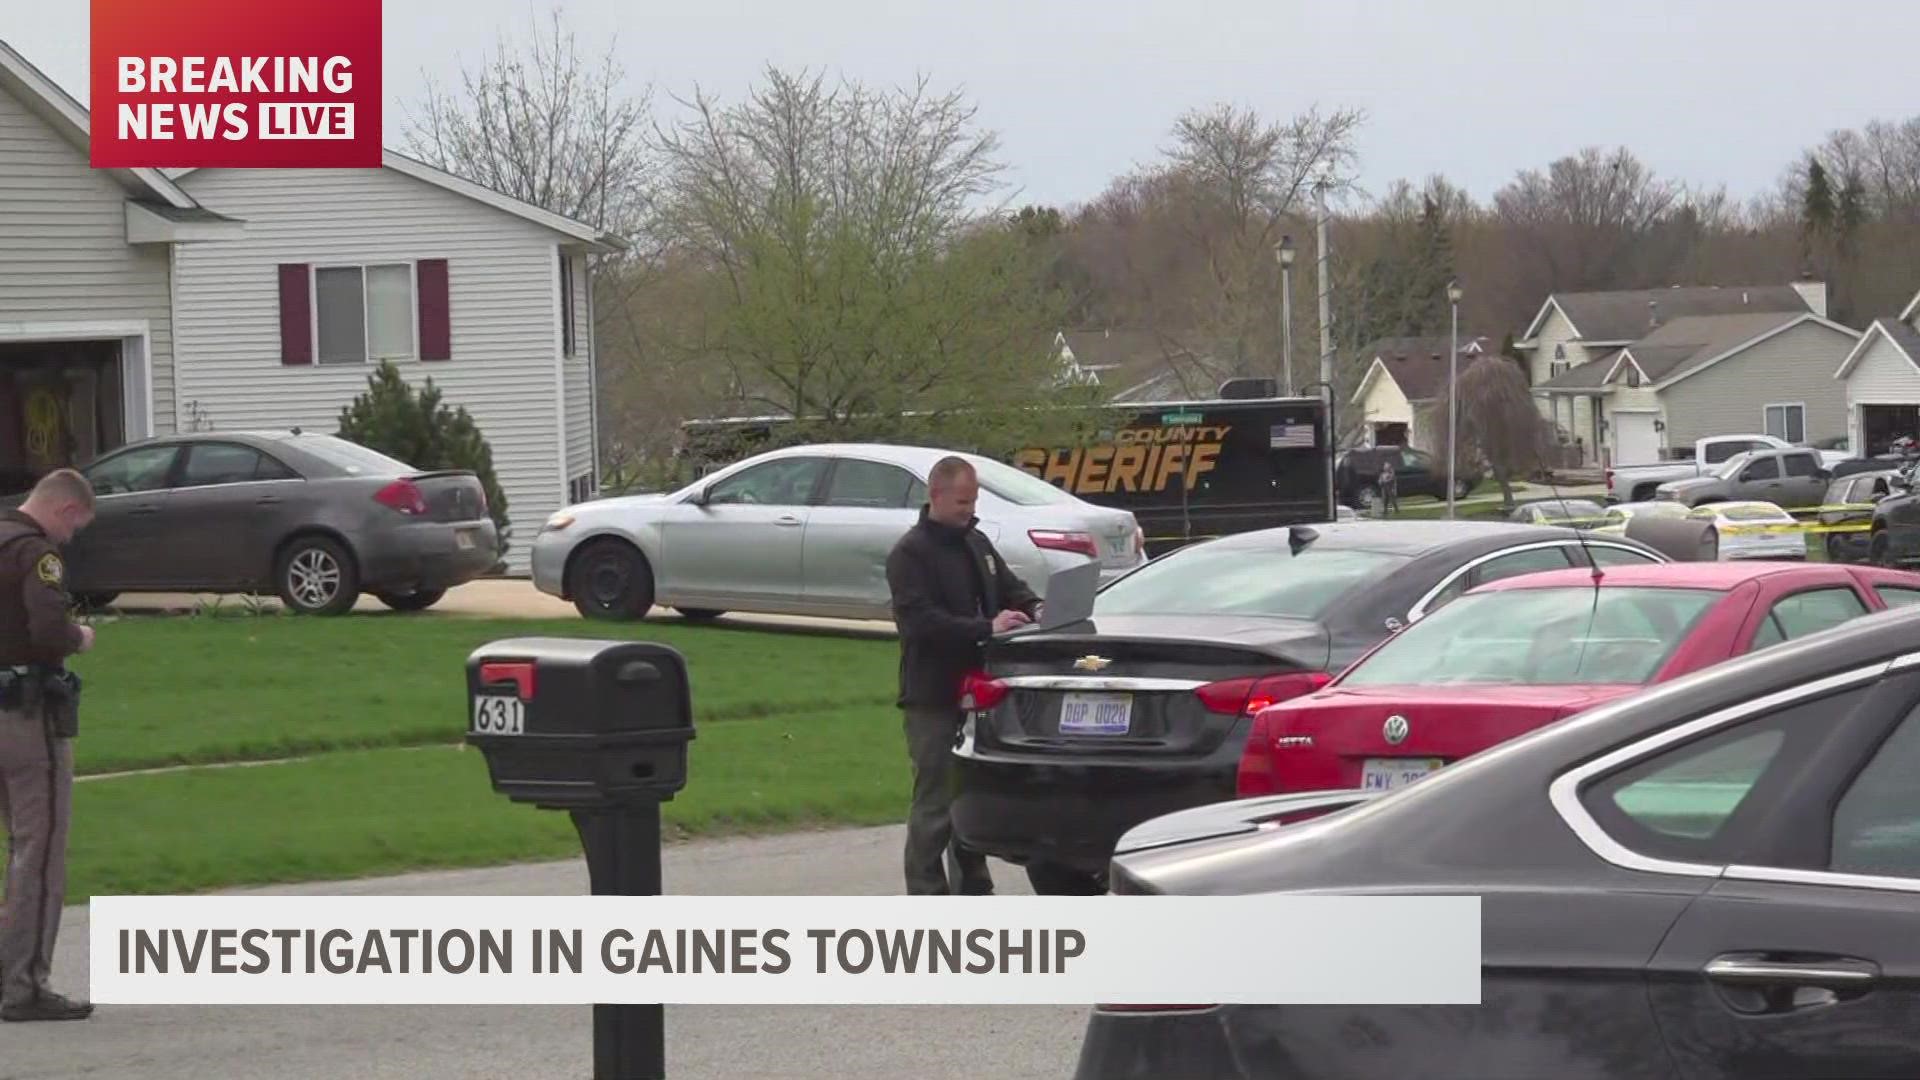 A deputy with the Kent County Sheriff's Office was shot in the hand during a welfare check in Gaines Township Thursday.